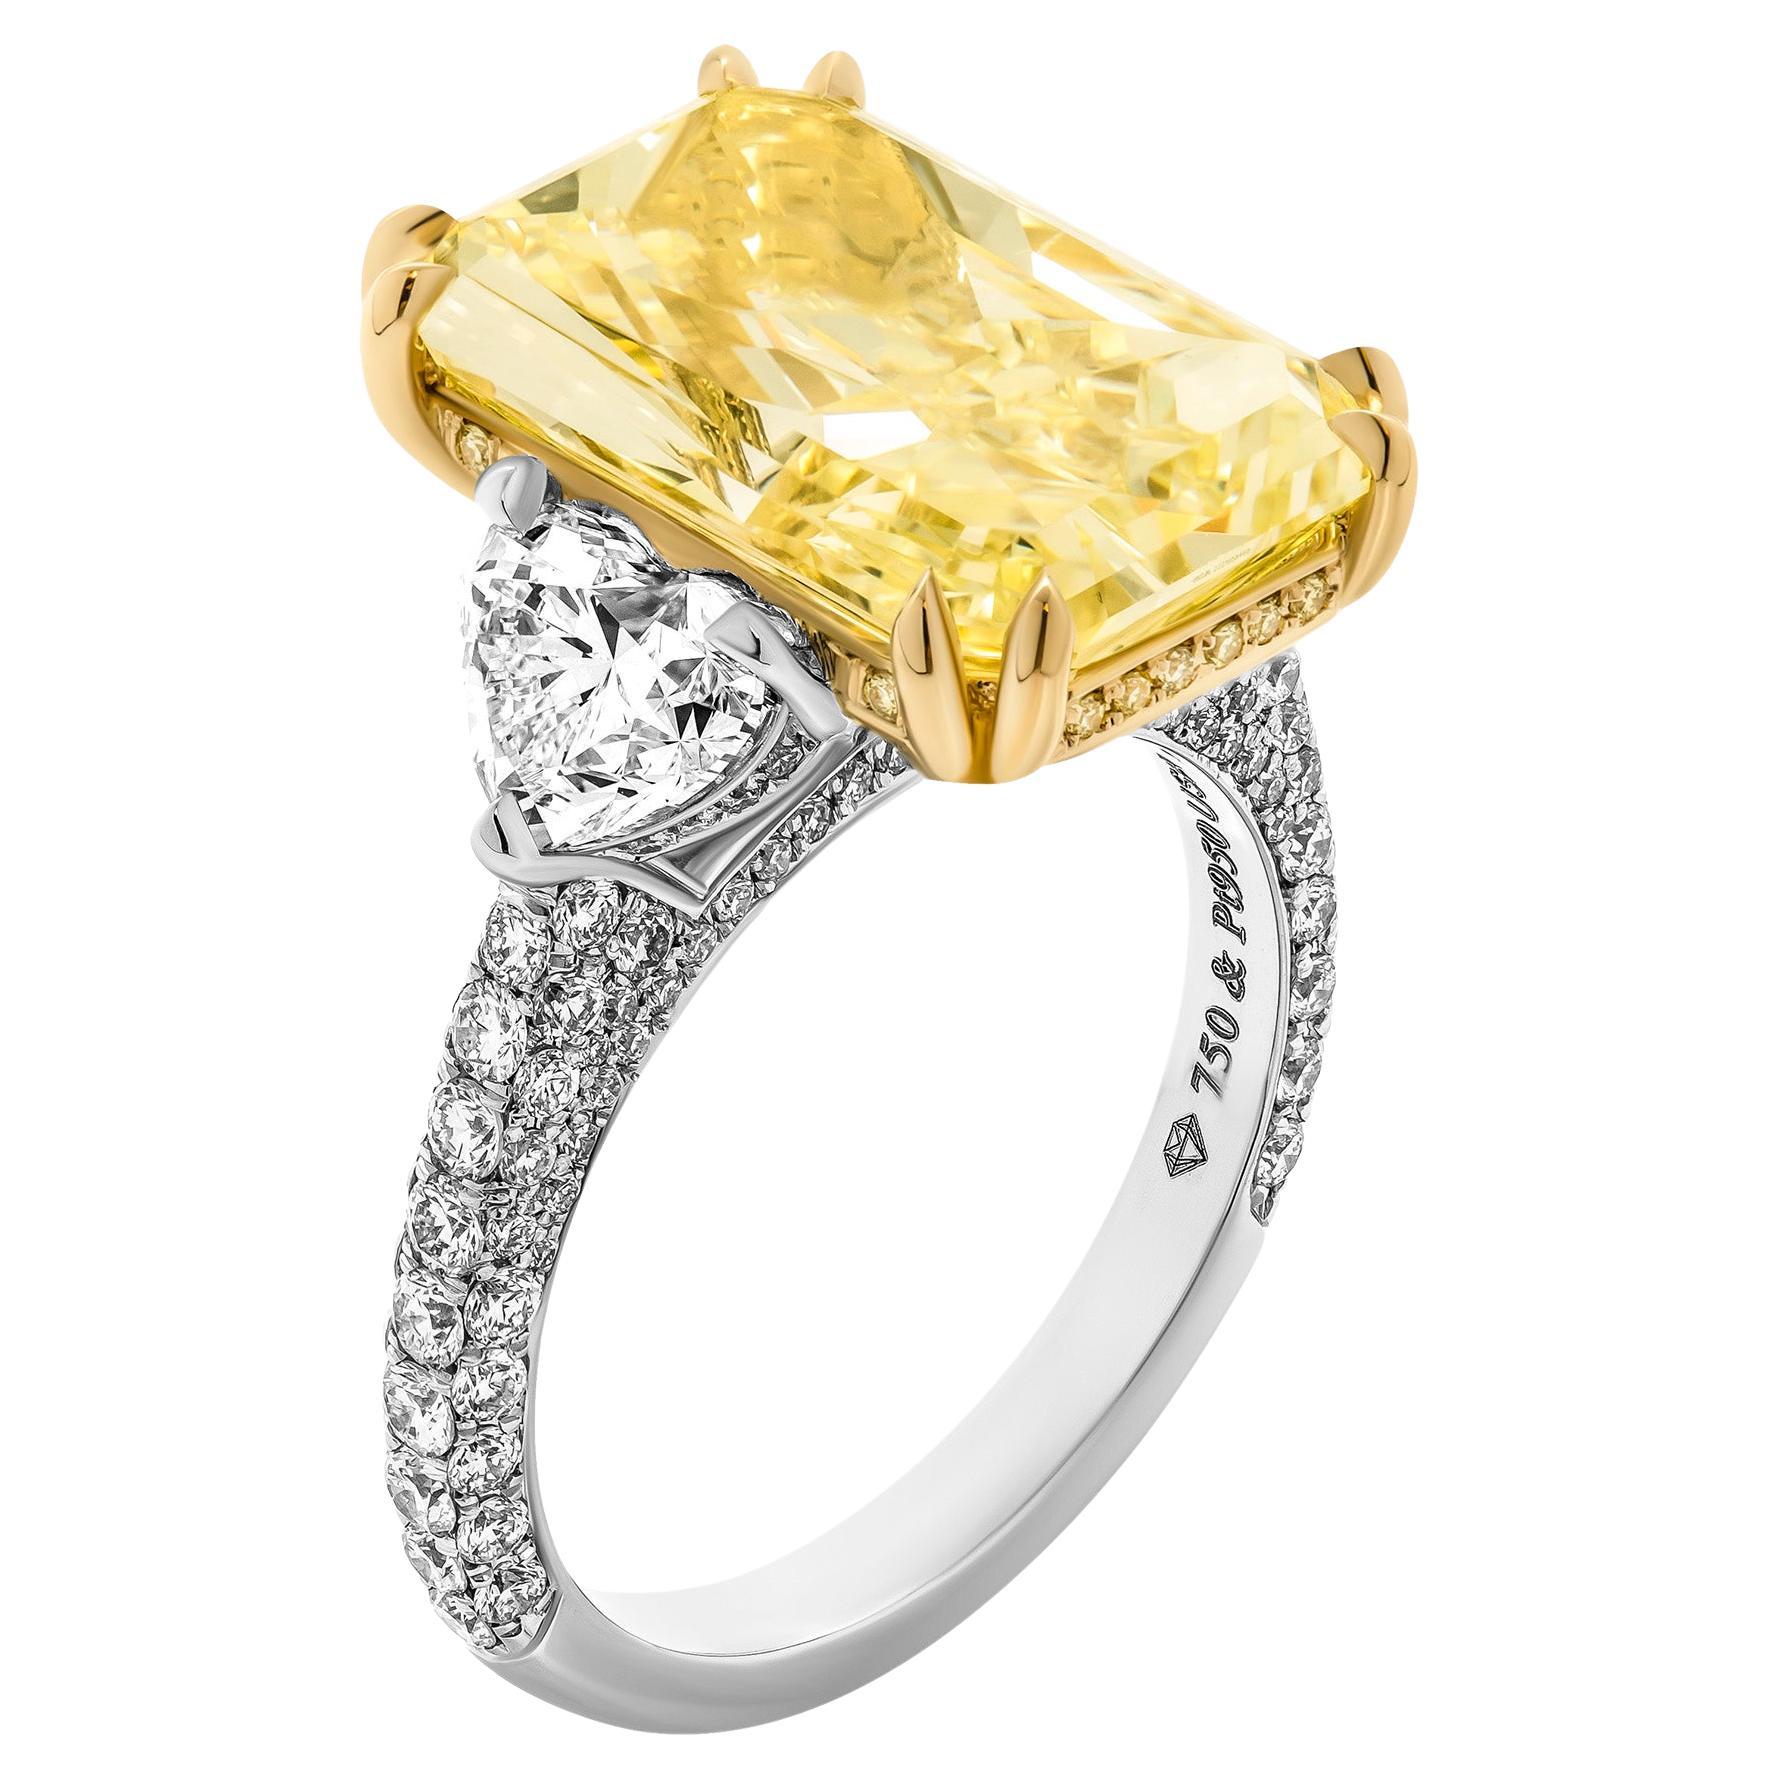 GIA Certified 3 Stone Ring with 8.10ct Fancy Yellow Radiant Cut Diamond